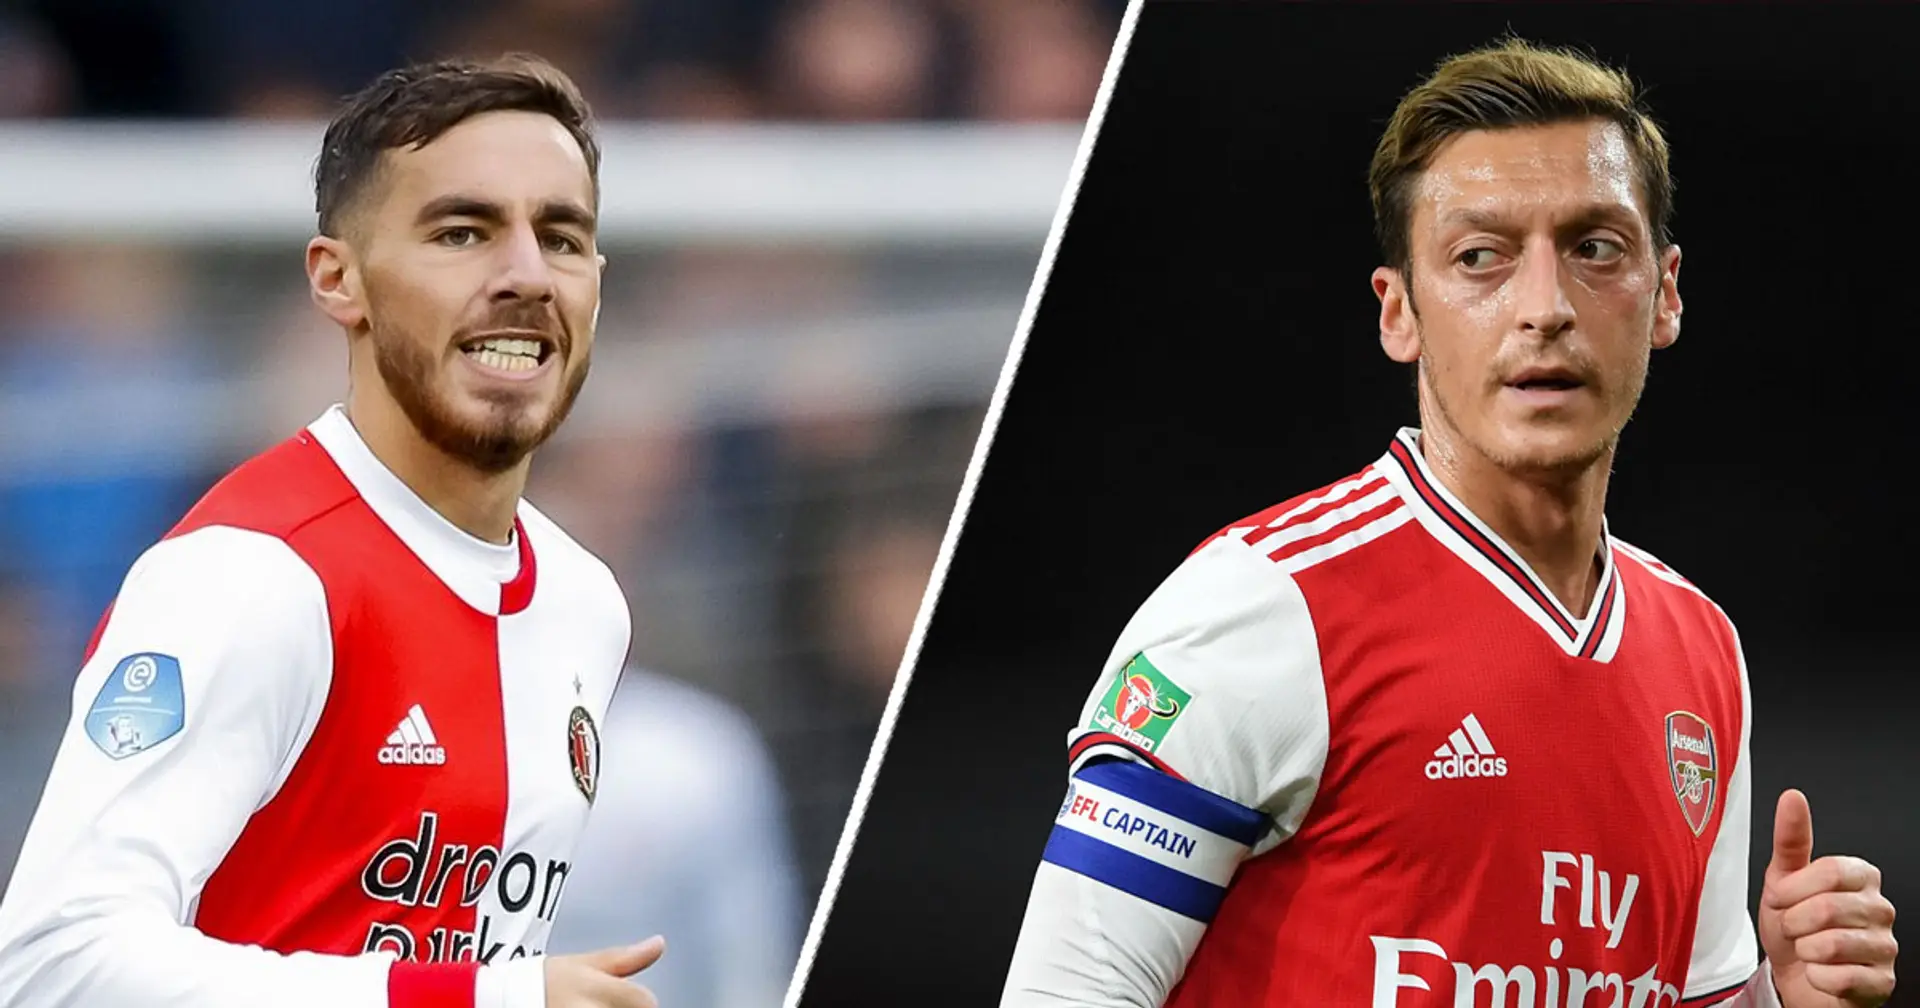 3 similarities and 3 differences between Arsenal-linked Orkun Kokcu and Mesut Ozil